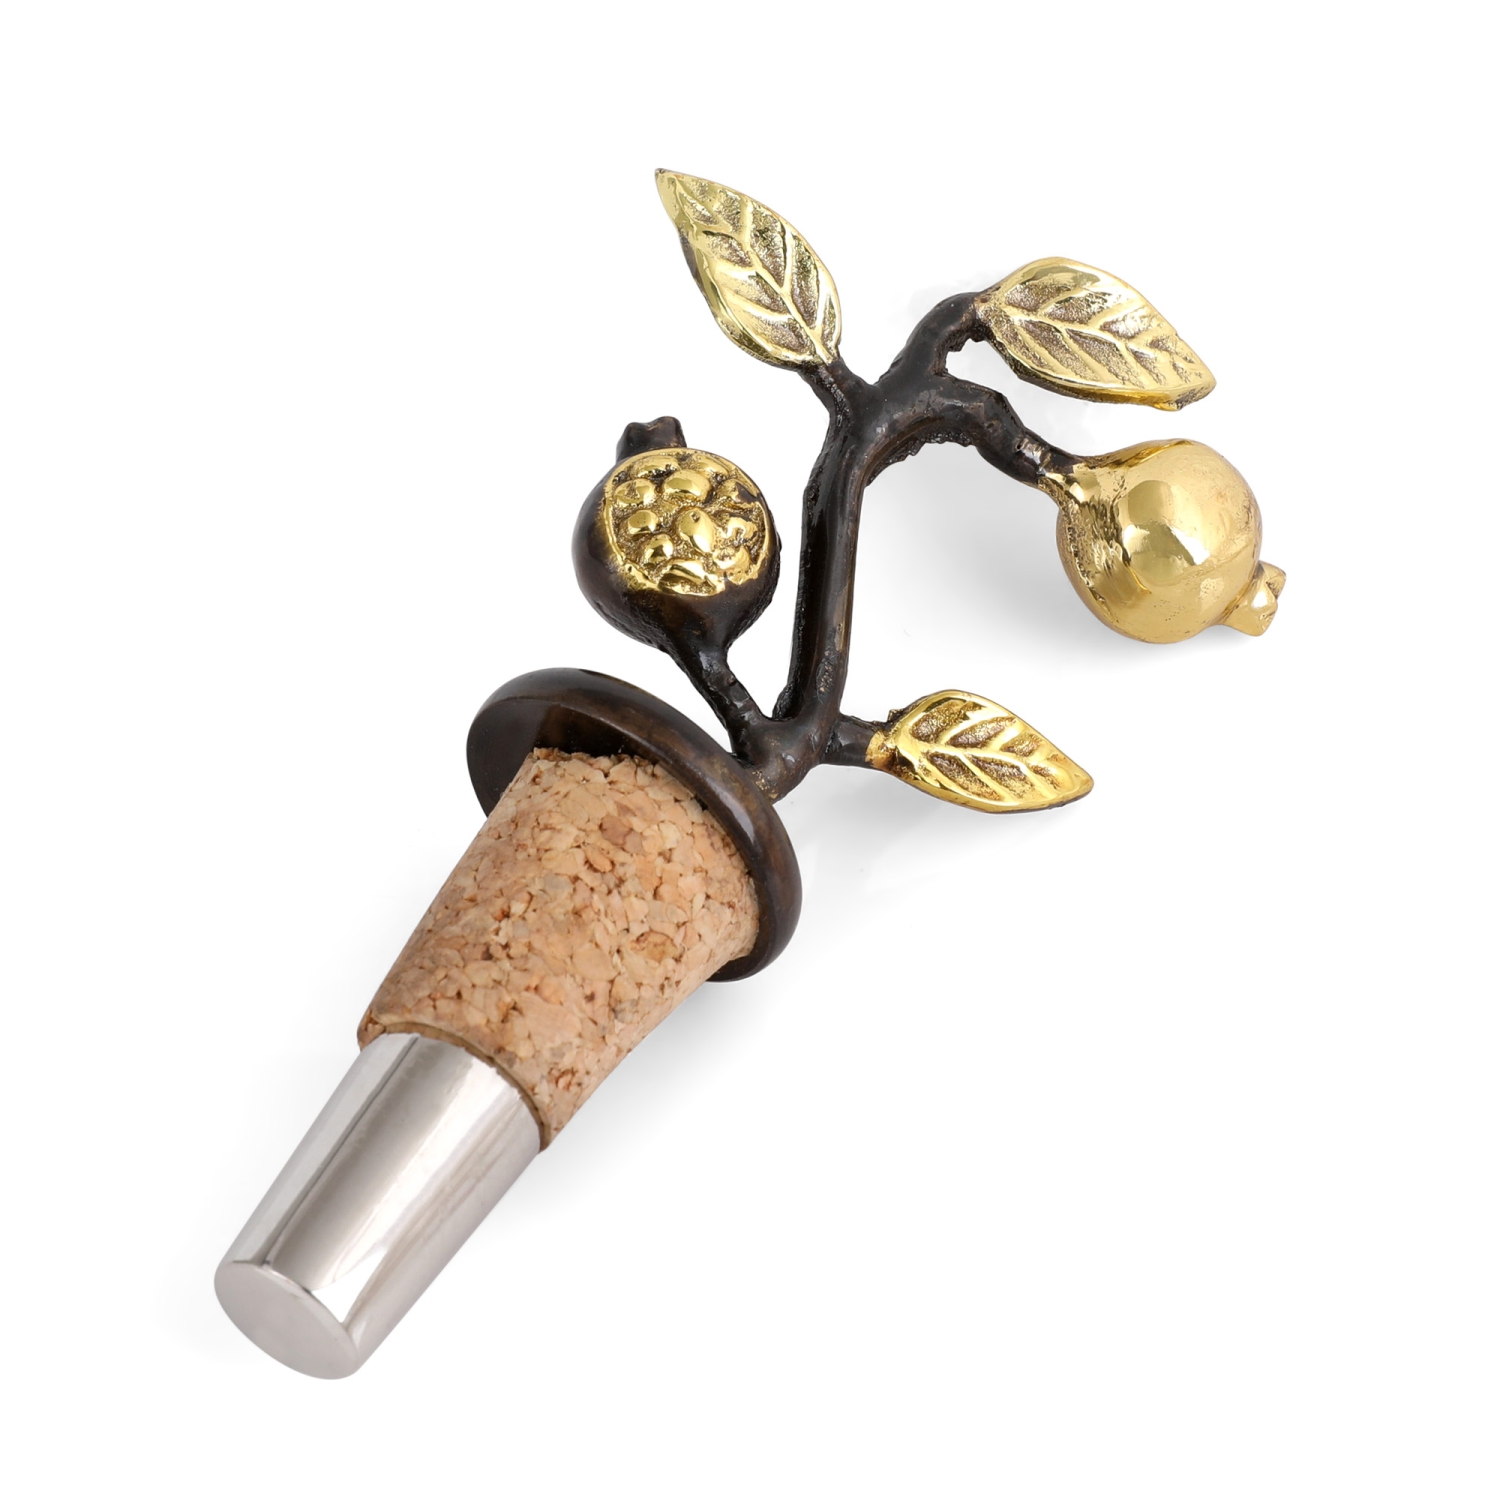 Yair Emanuel Stainless Steel and Copper Wine Cork with Pomegranates - 1